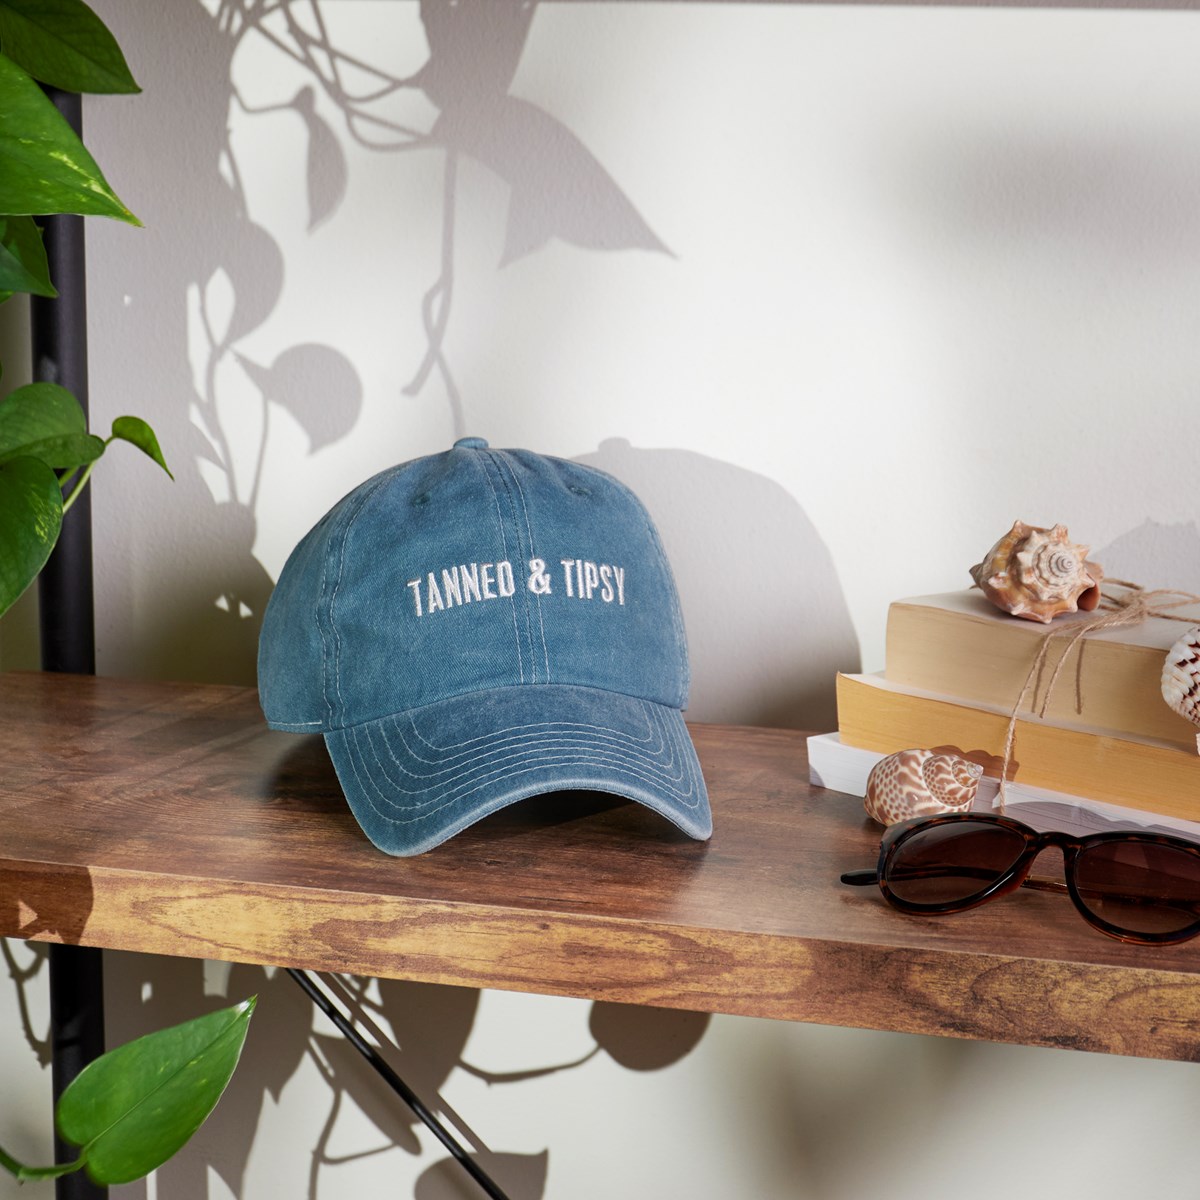 Tanned And Tipsy Baseball Cap - Cotton, Metal